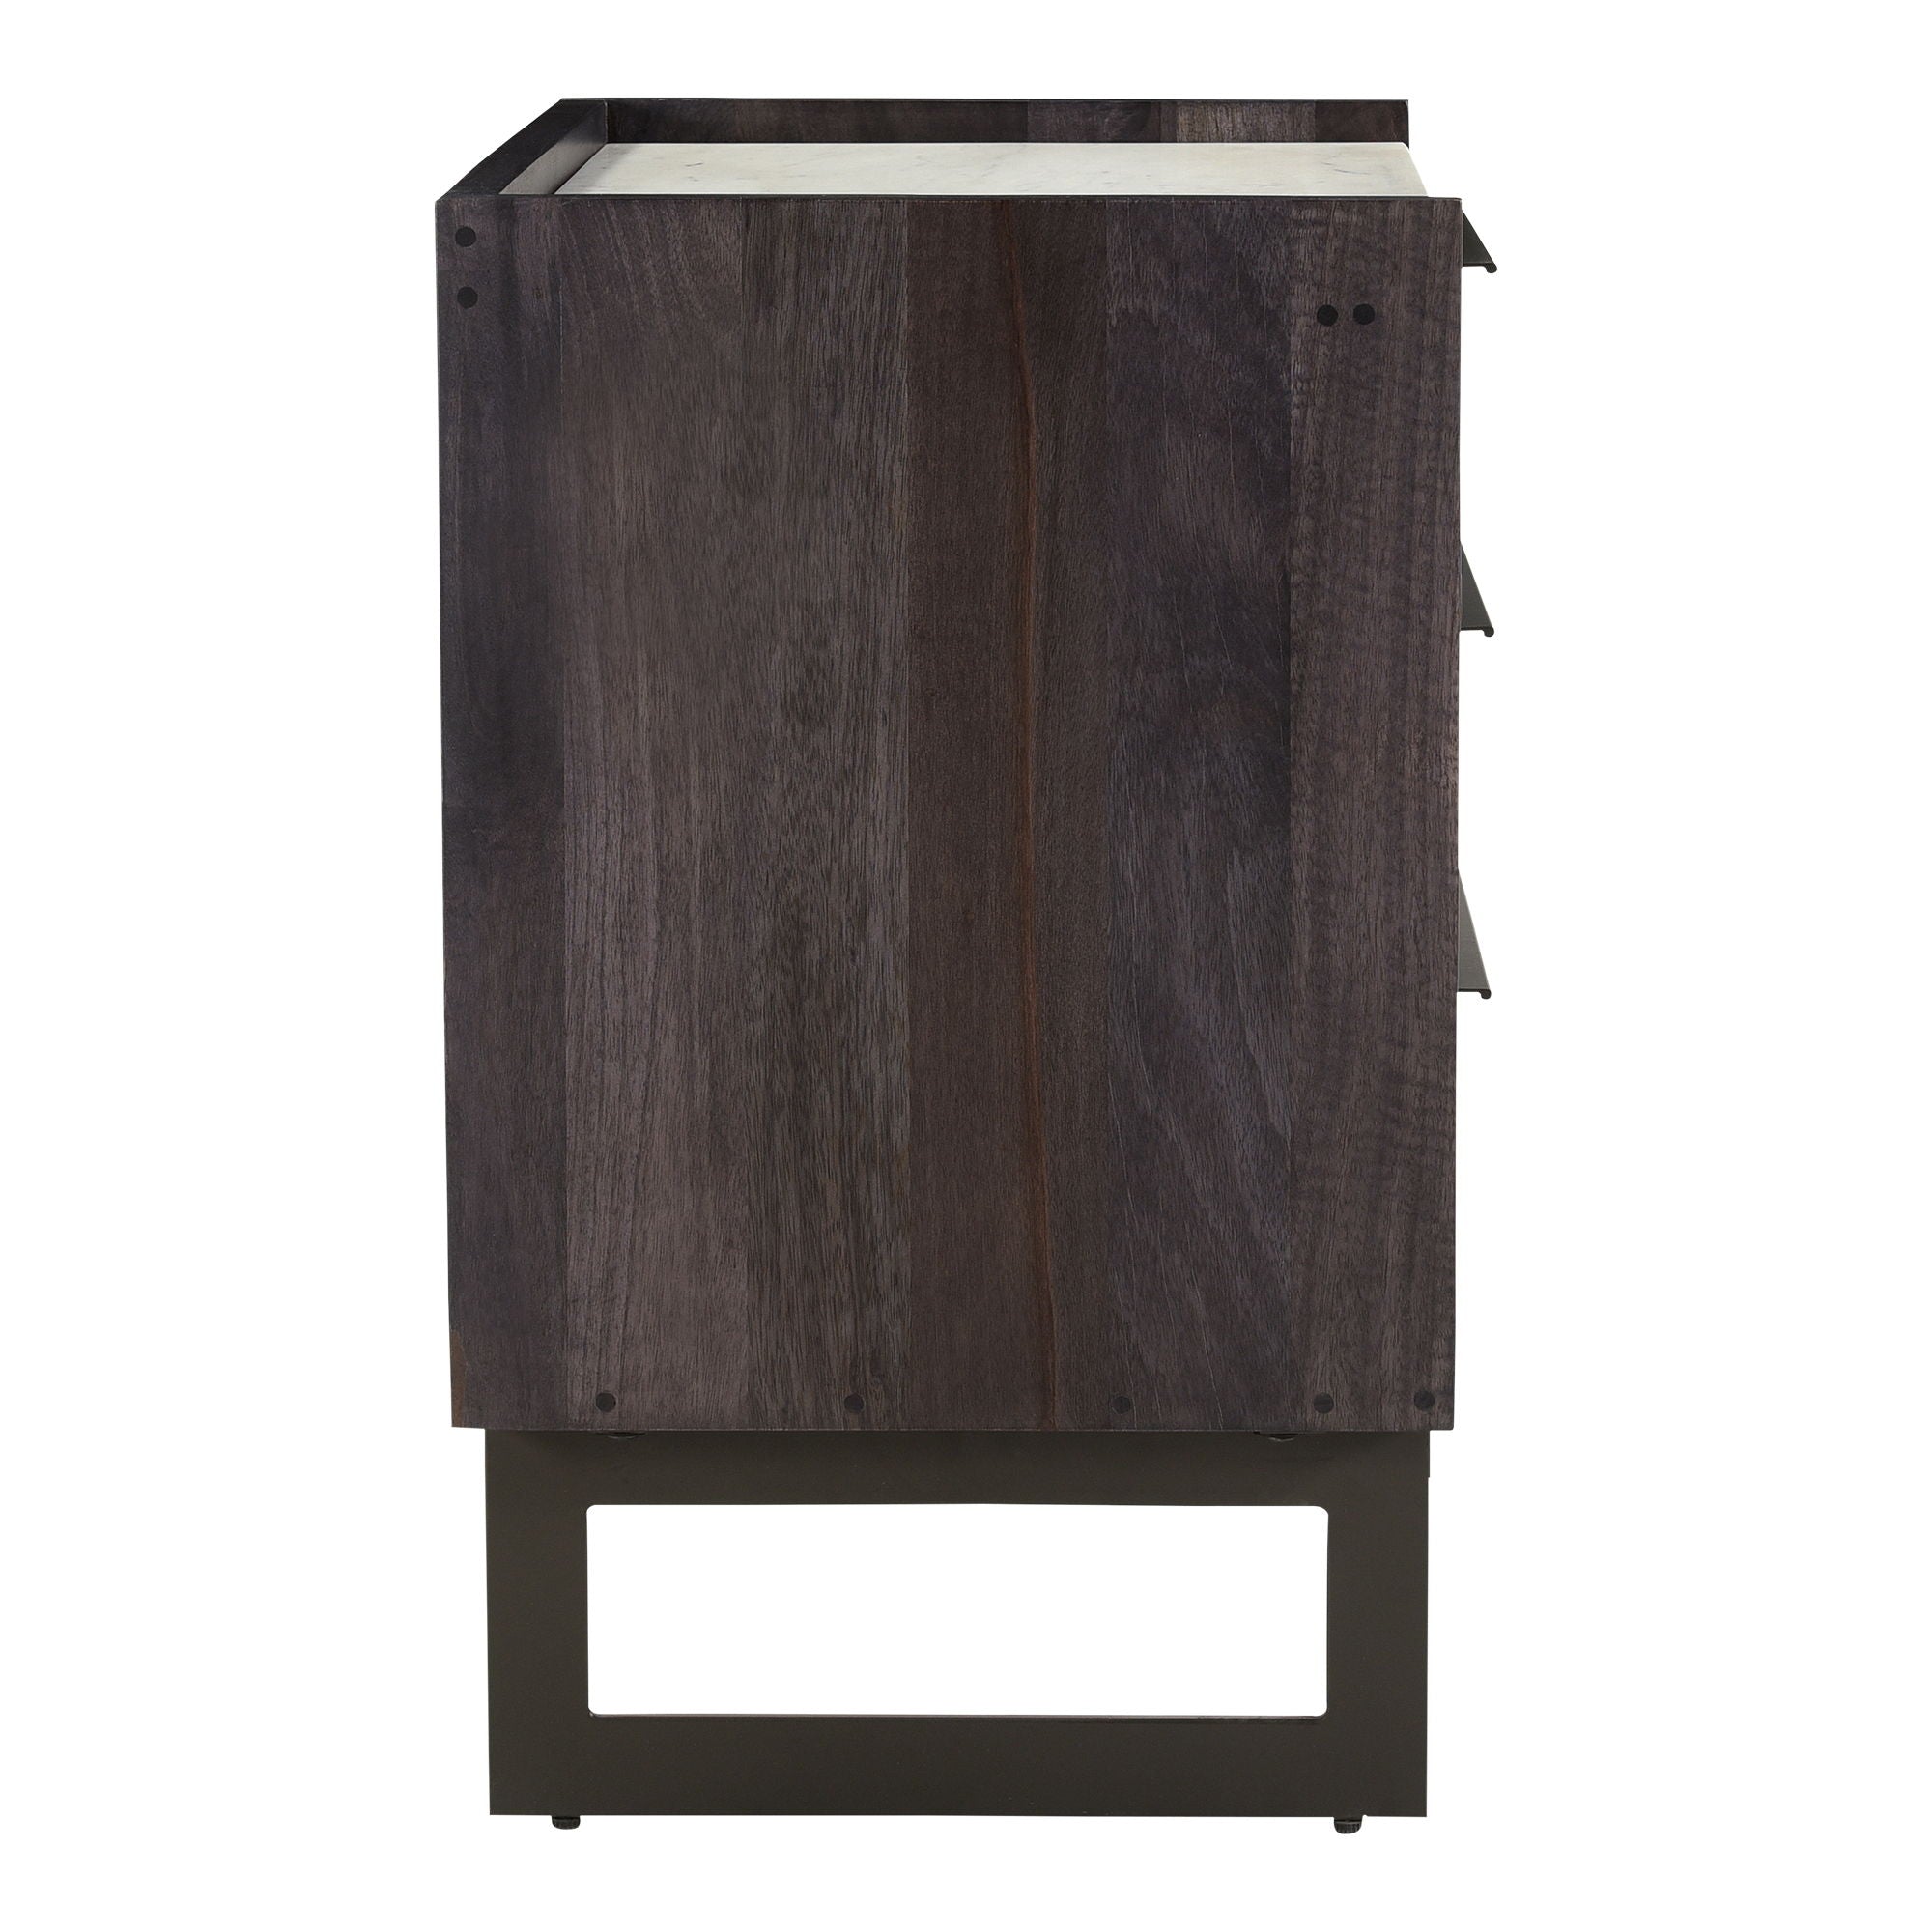 Paloma - 3 Drawer Chest - Brown